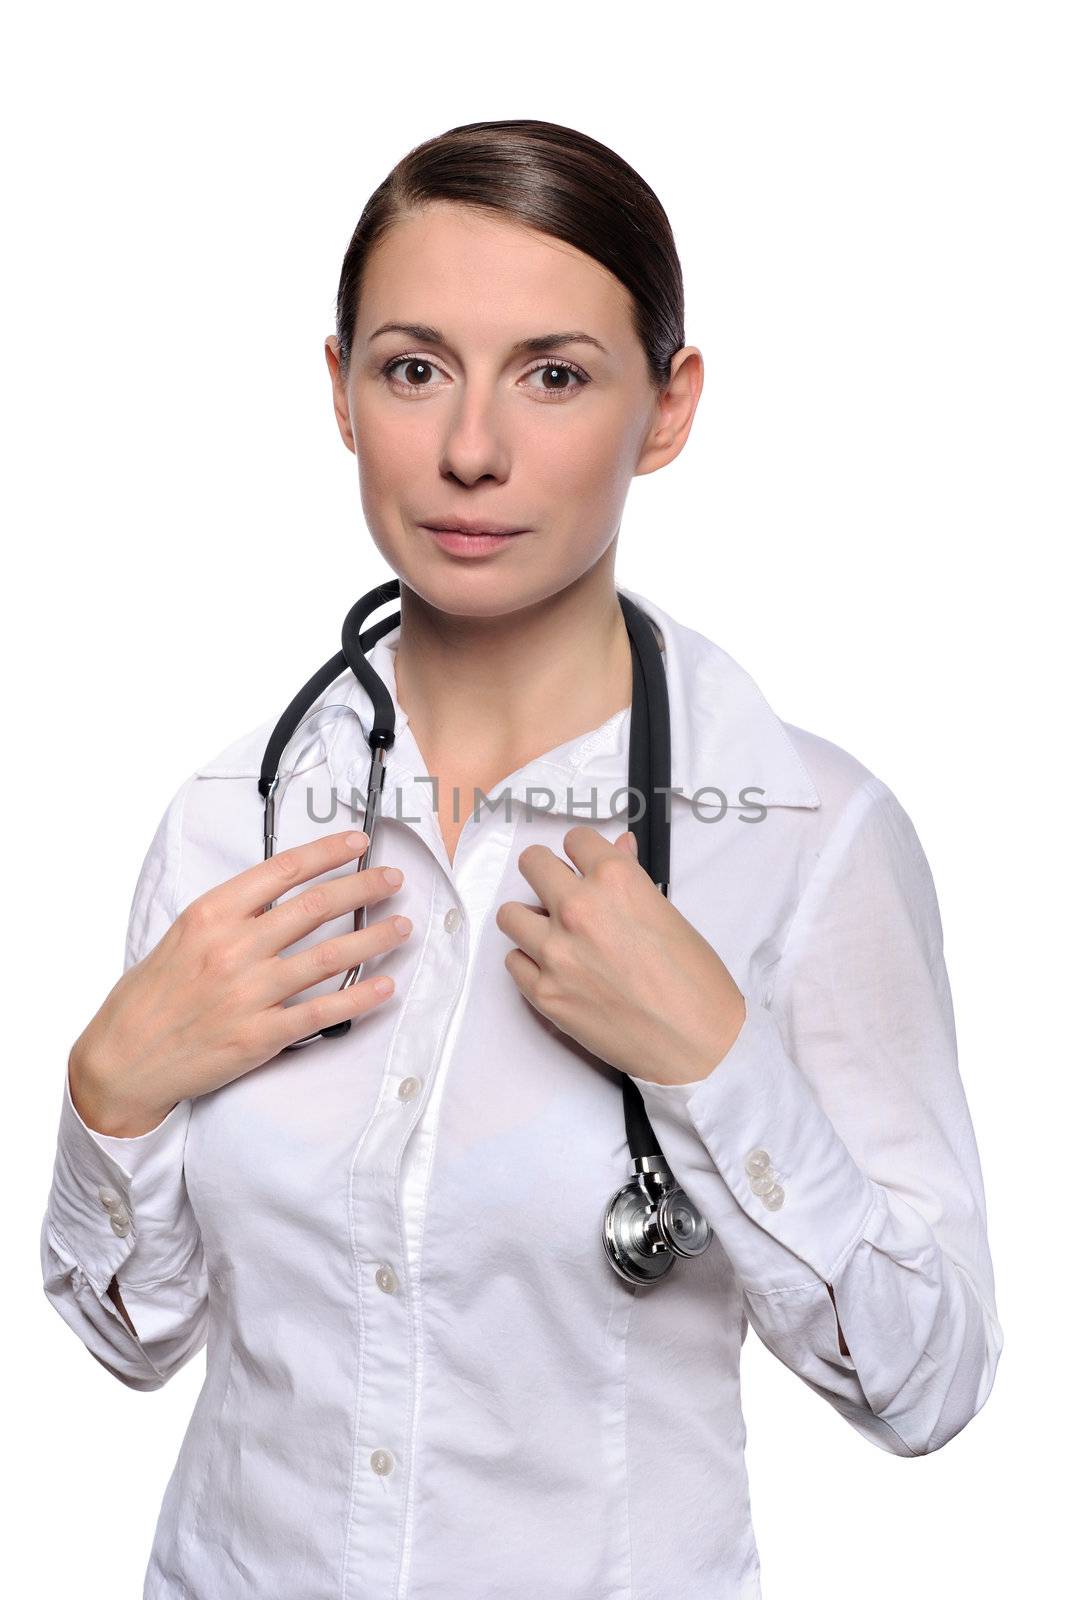 Female doctor with a stethoscope by kirs-ua